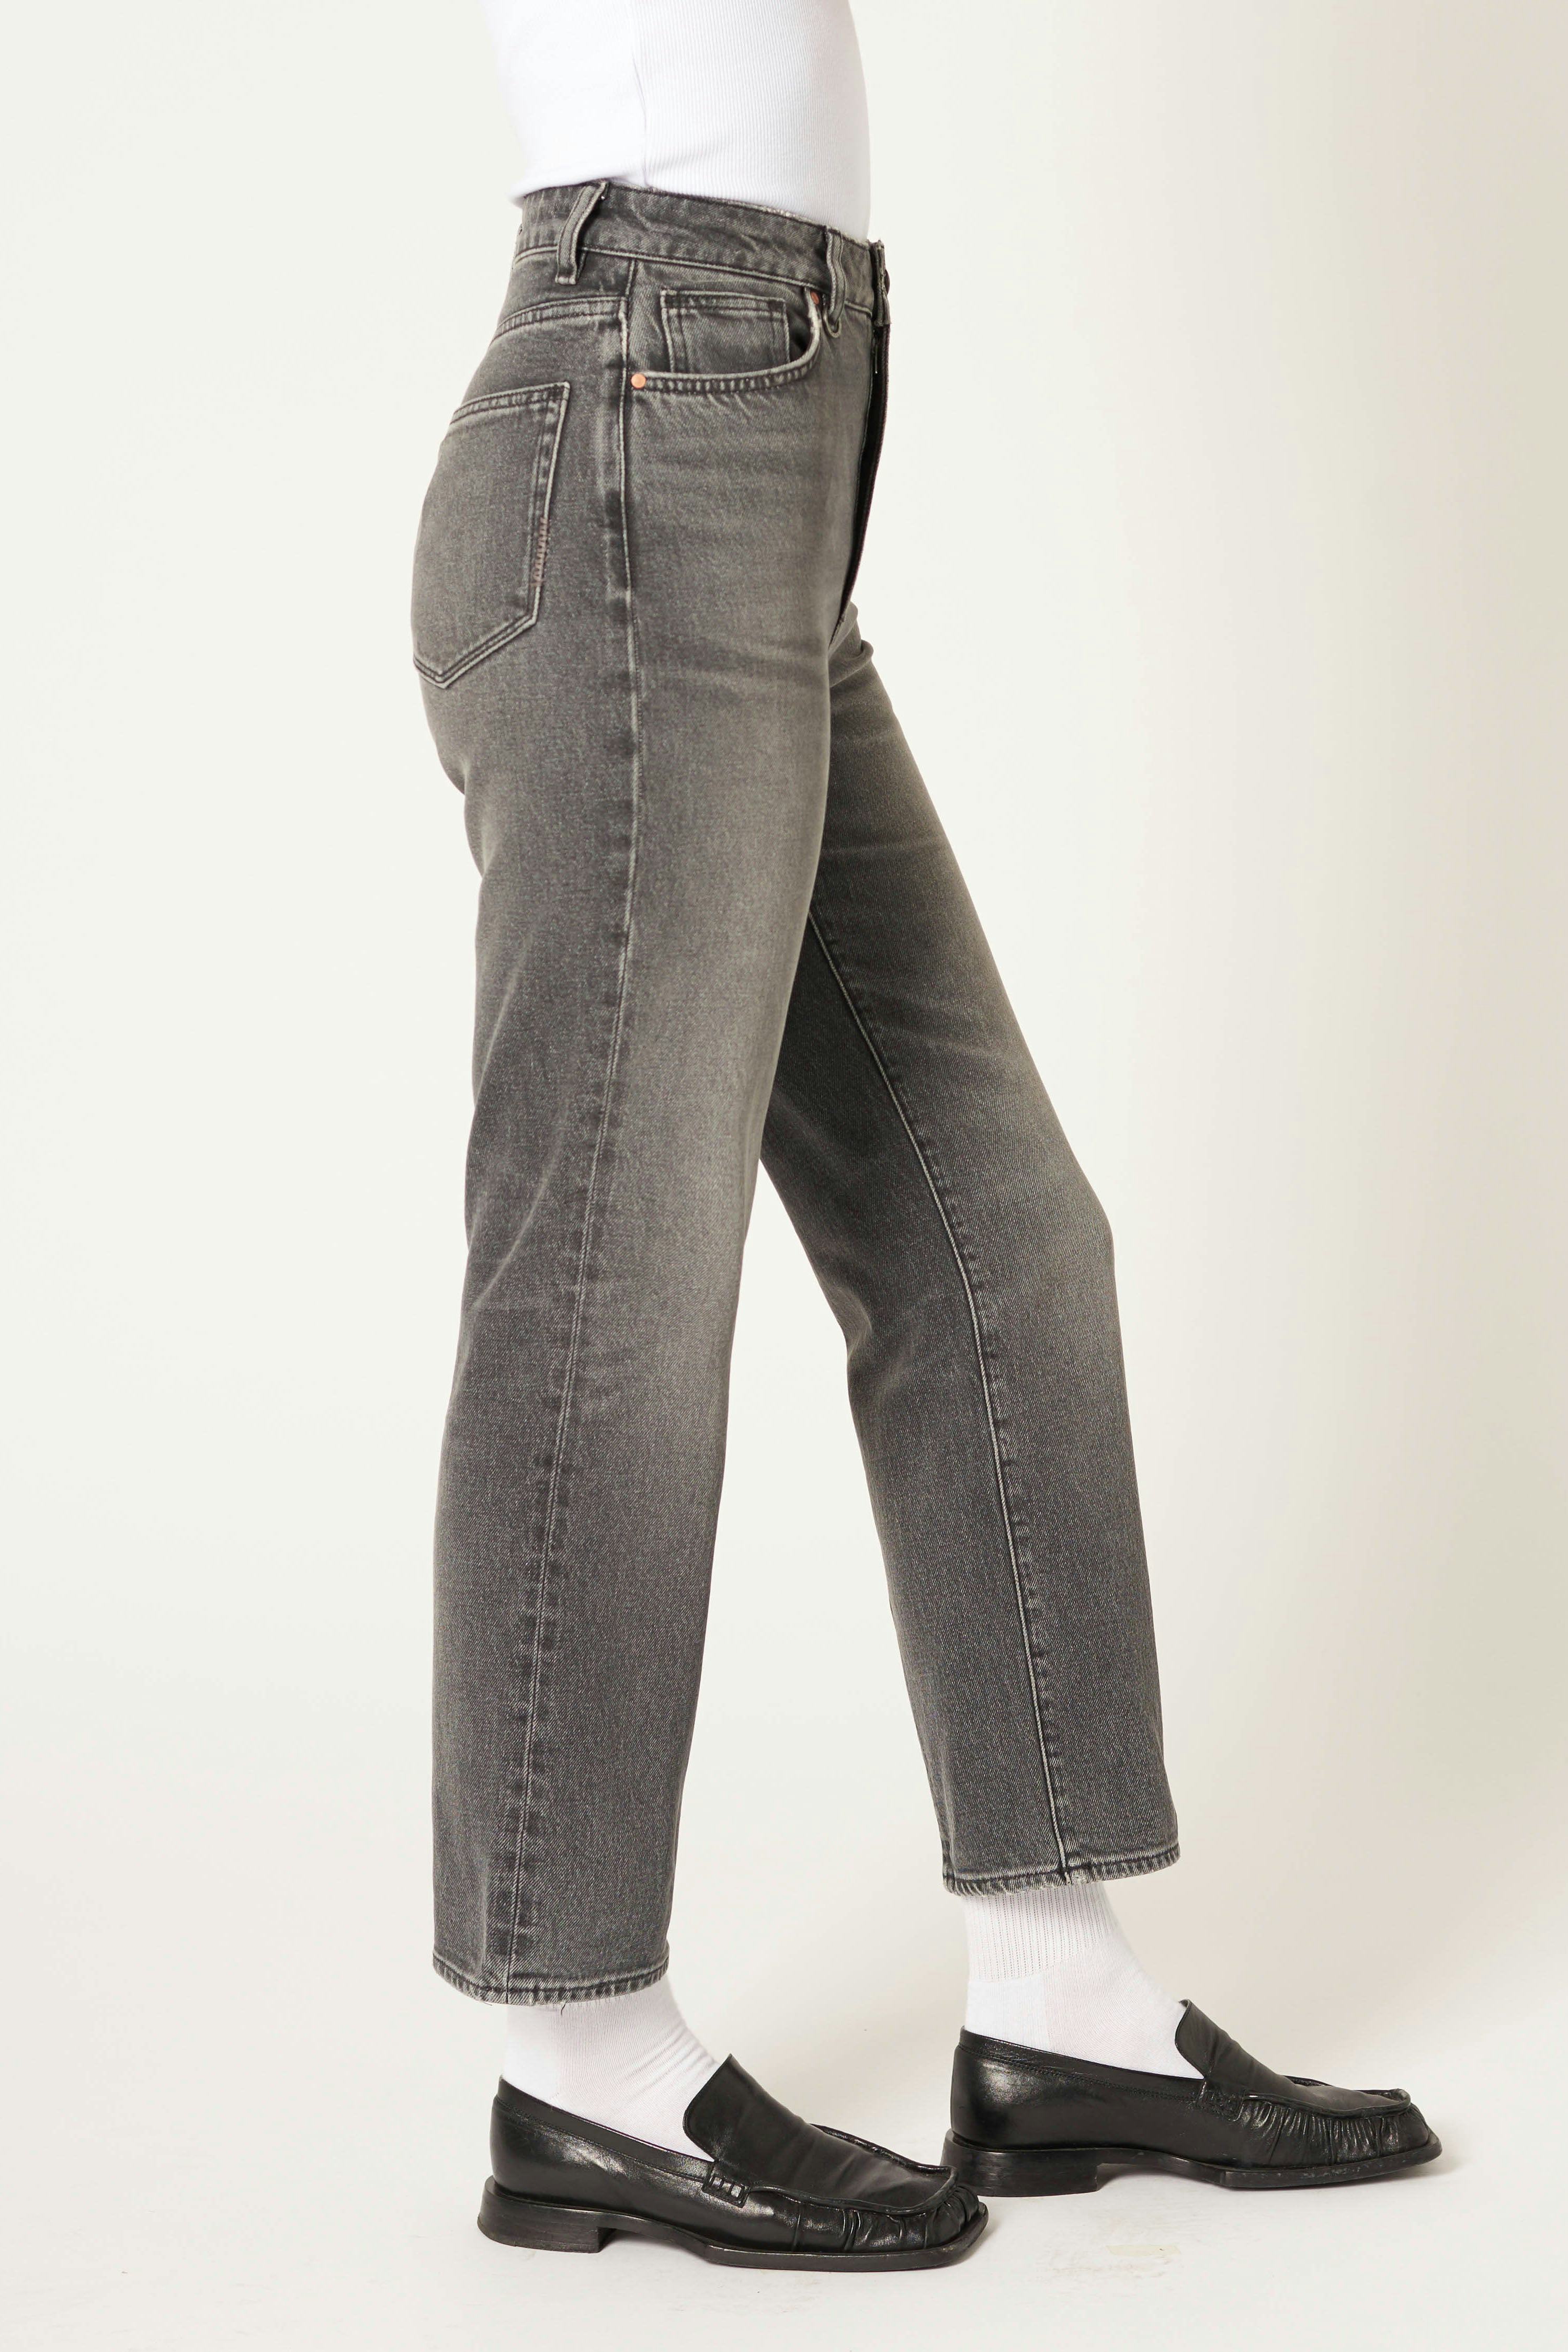 Nico Straight - Nocturnal Neuw mid dimgray womens-jeans 